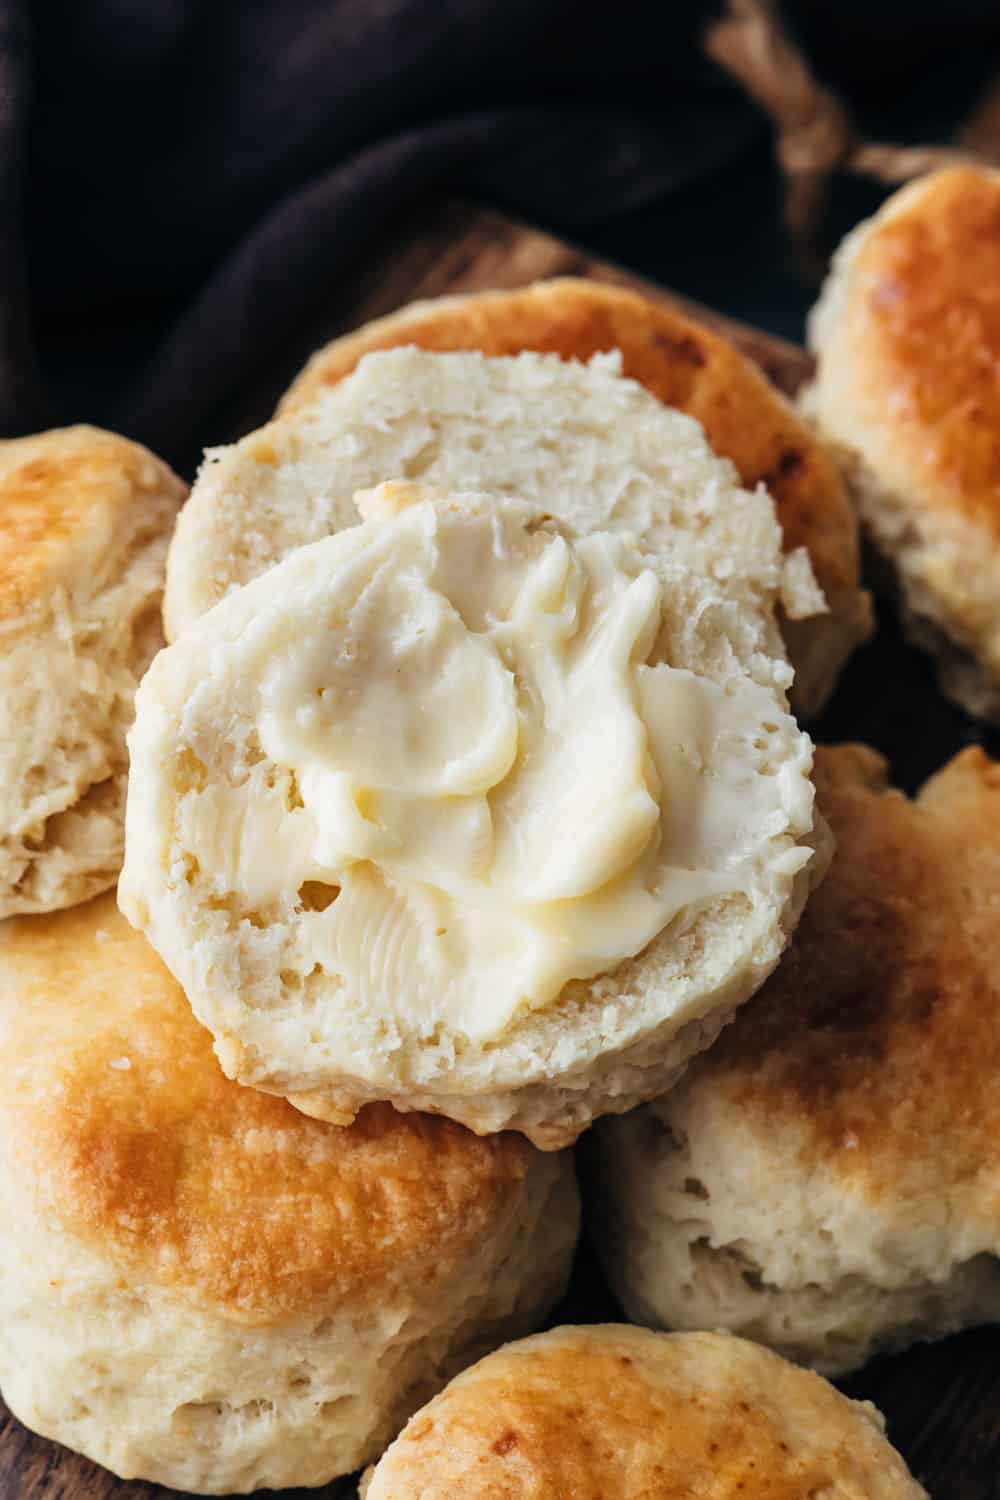 Butter slathered on buttermilk buscuits